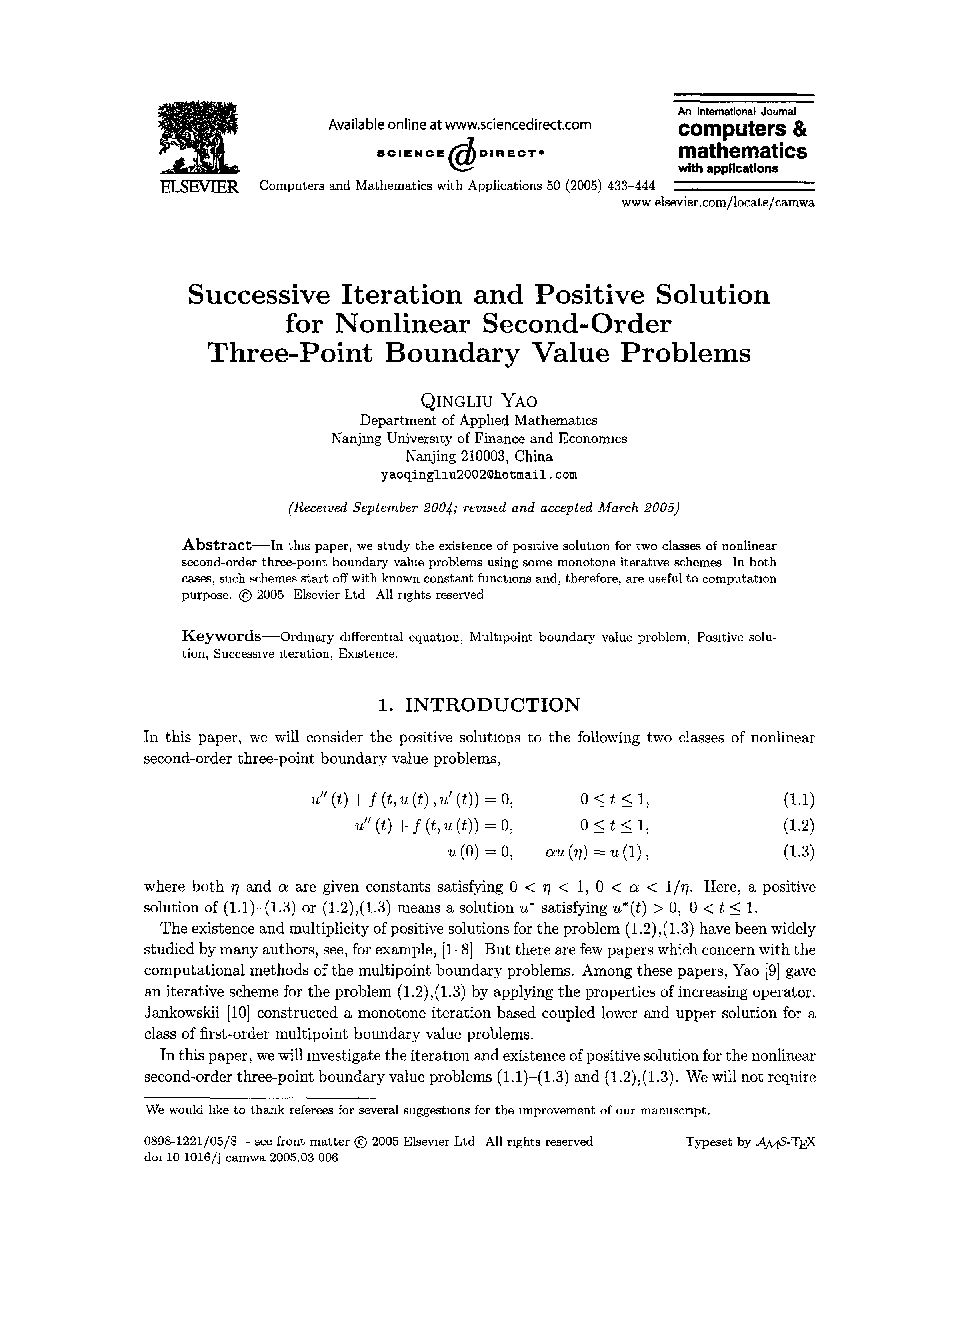 Successive iteration and positive solution for nonlinear second-order three-point boundary value problems